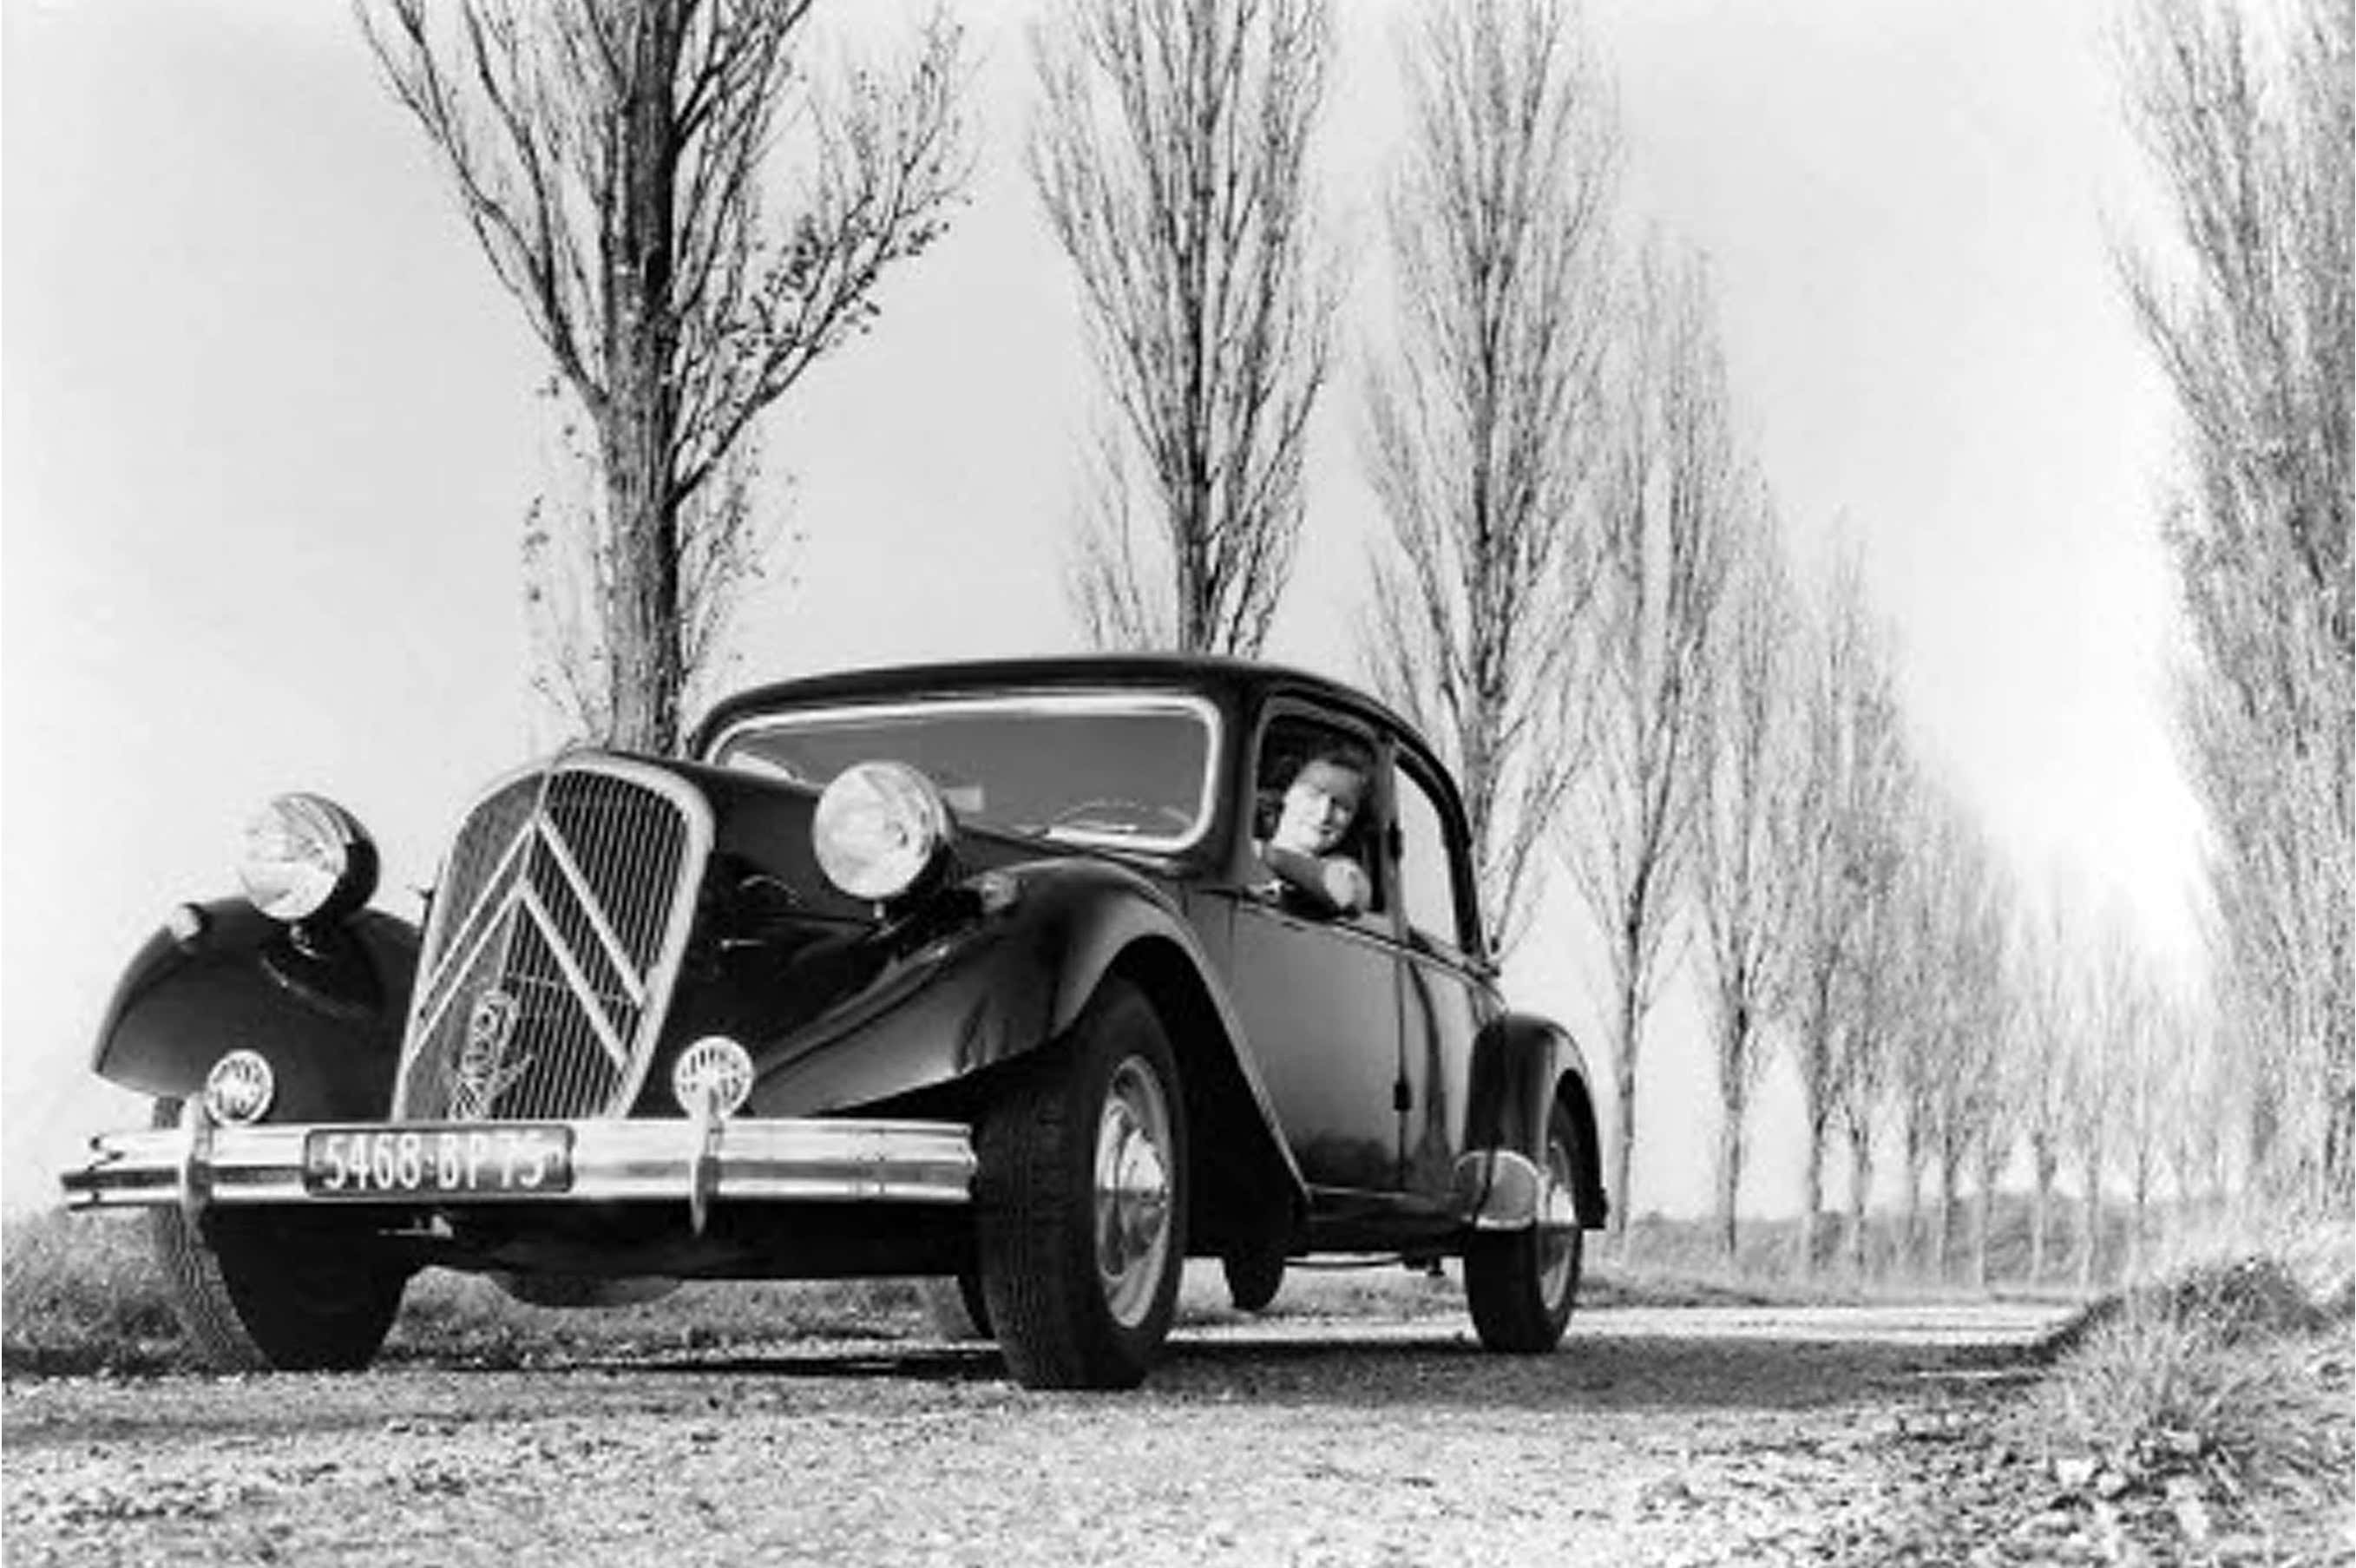 Jay Leno's All-Original 1949 Citroen Traction Avant Is a Joy To Drive by Design - The Drive